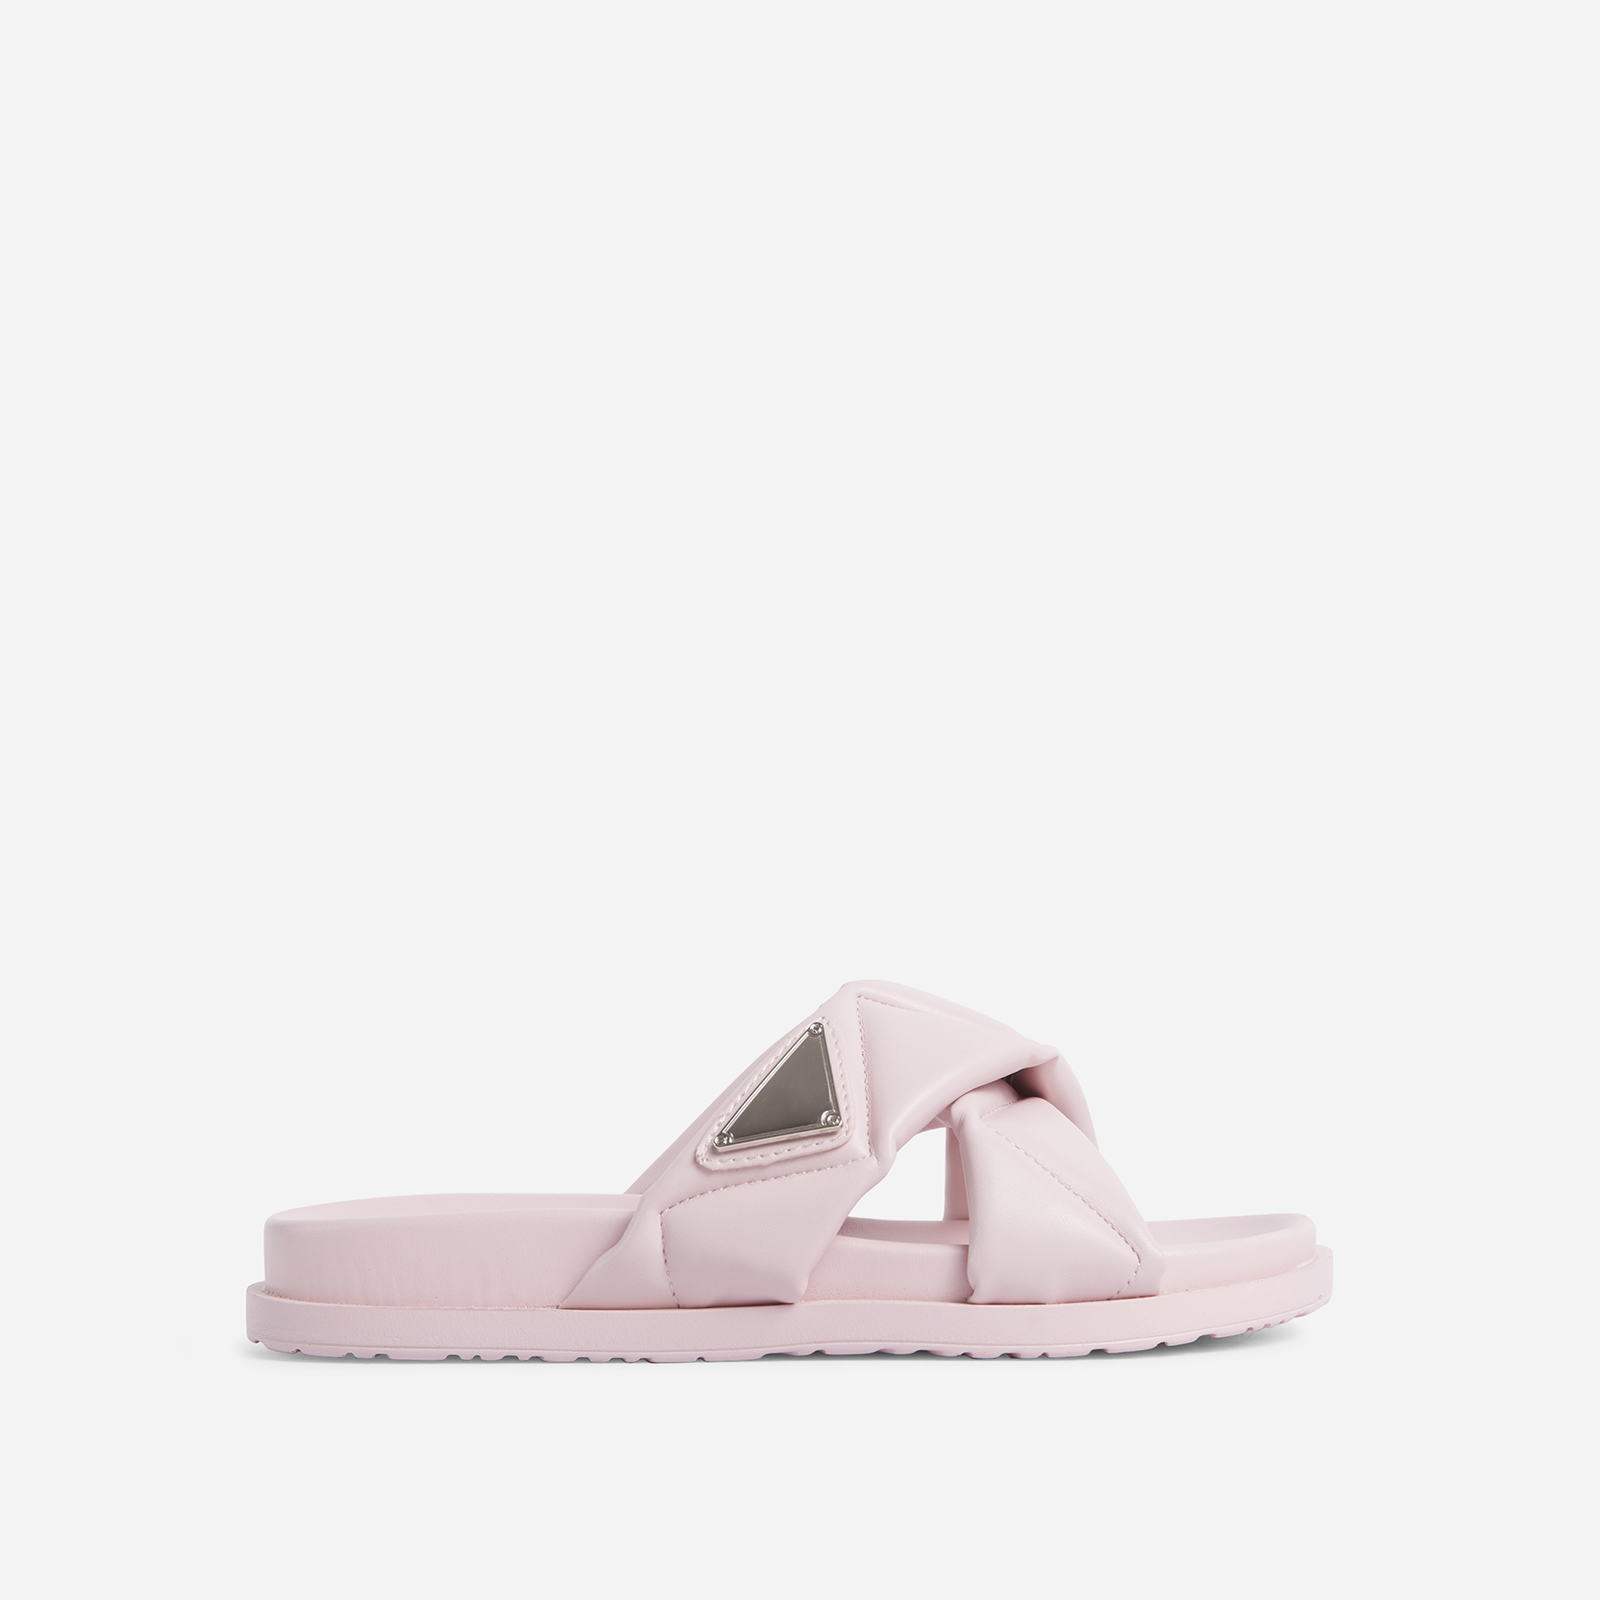 iconic-babe quilted cross strap detail flat slider sandal in pink faux leather, pink